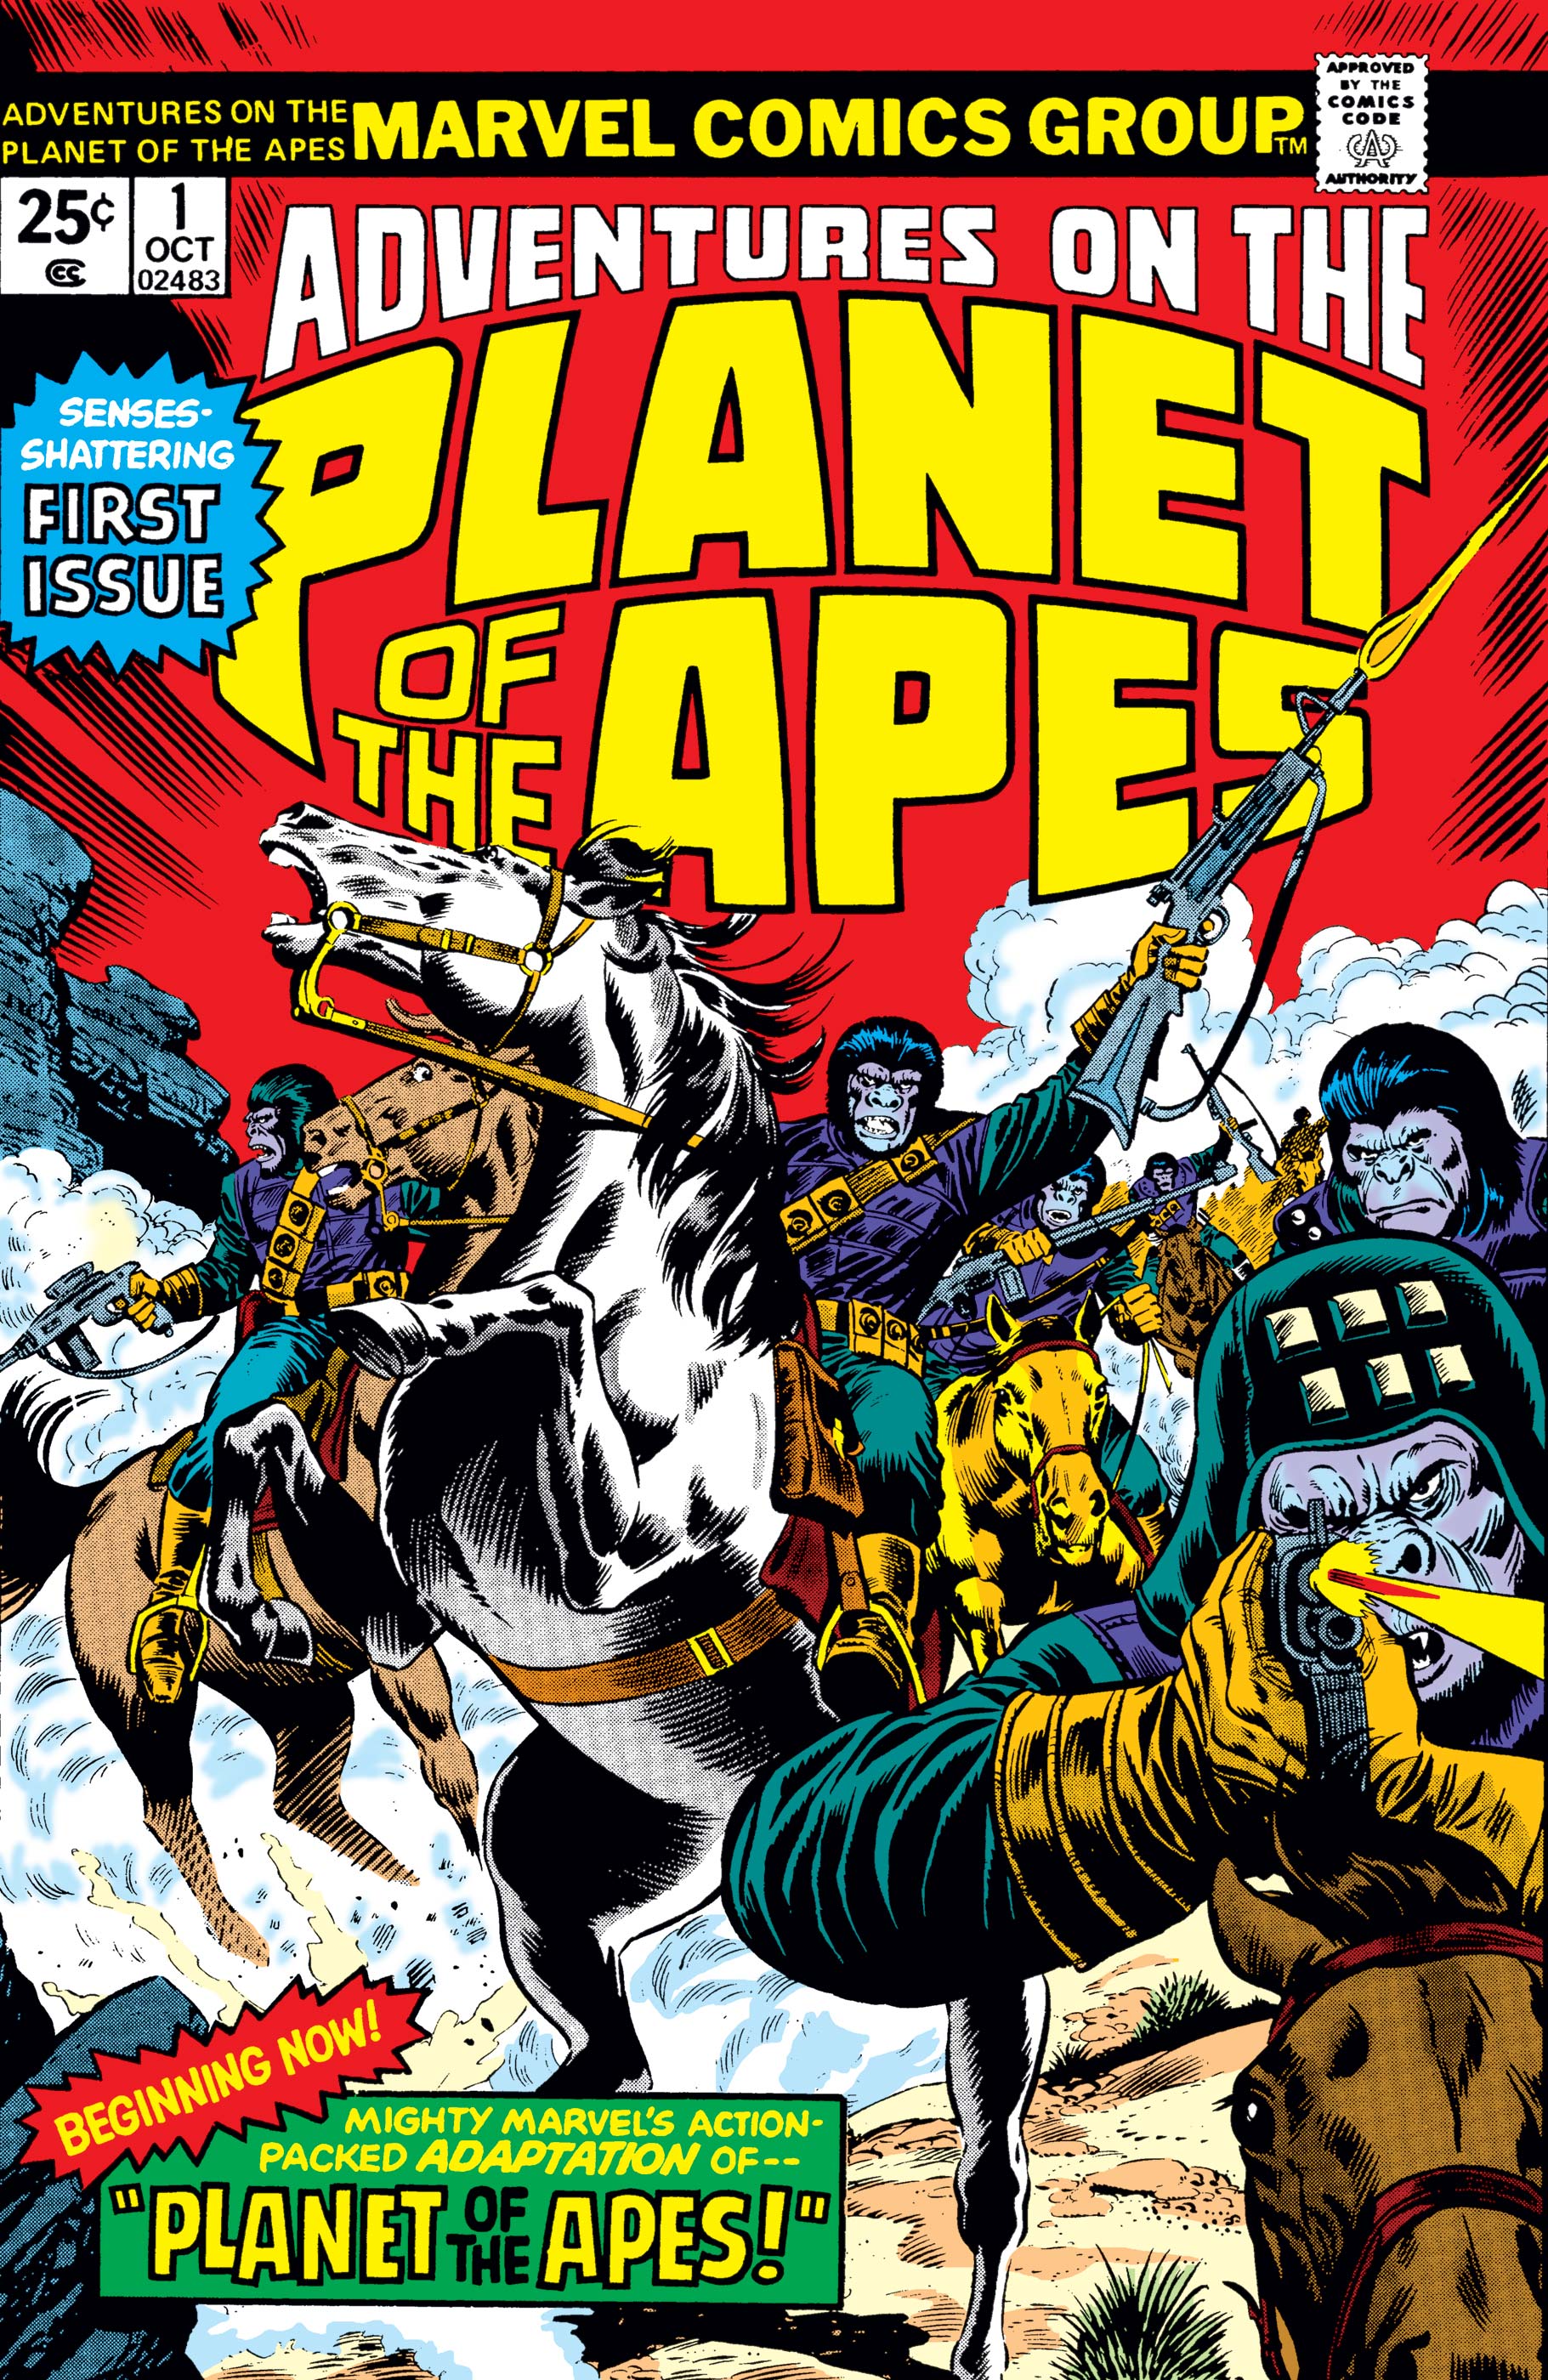 Adventures on the Planet of the Apes (1975) #1